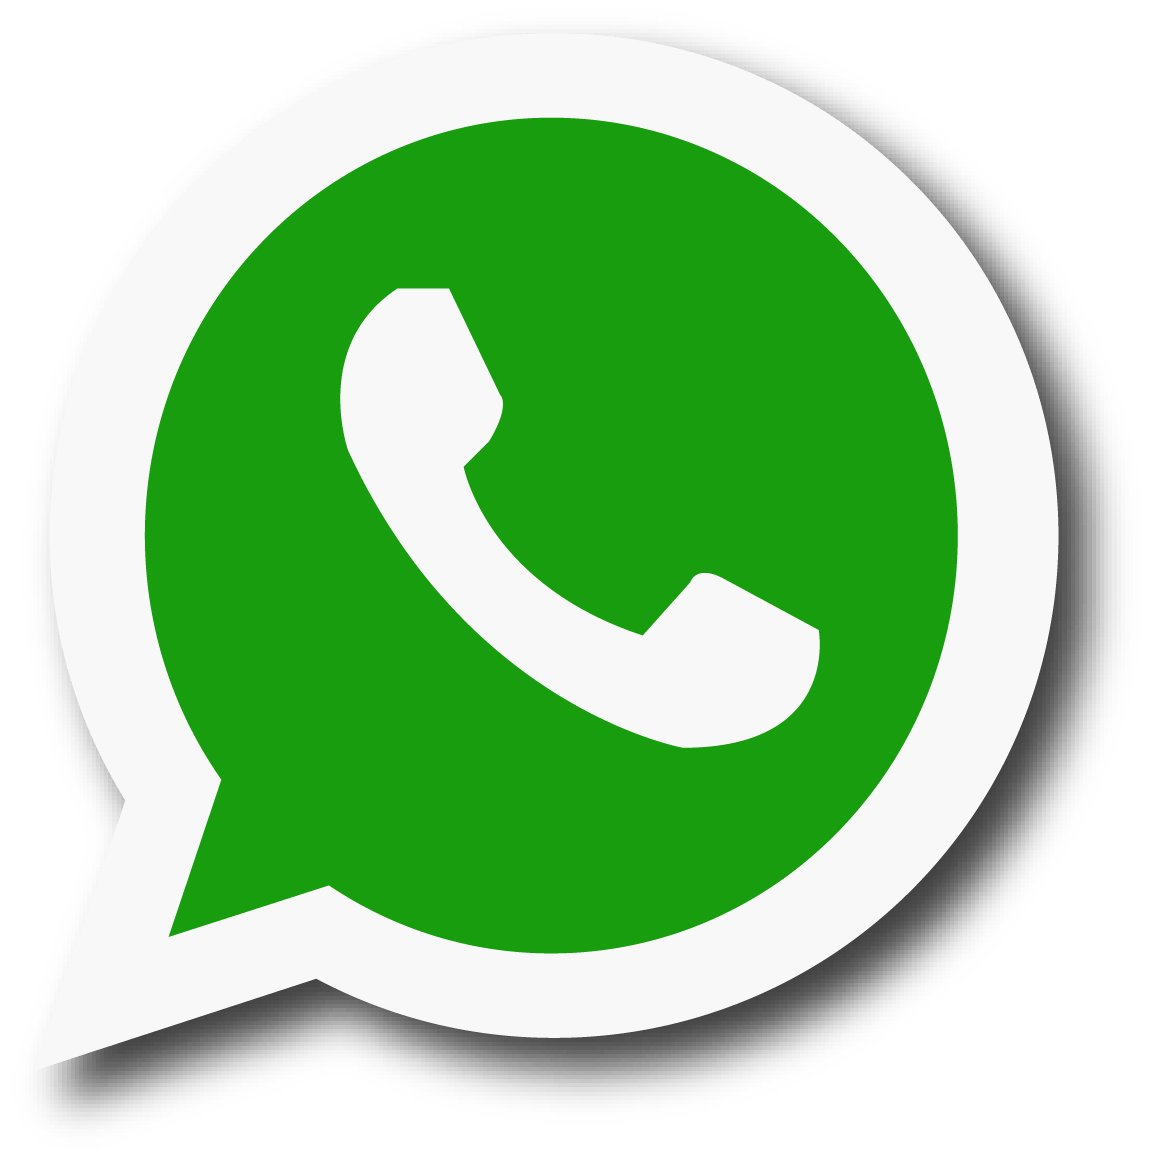 Contact by WhatsApp